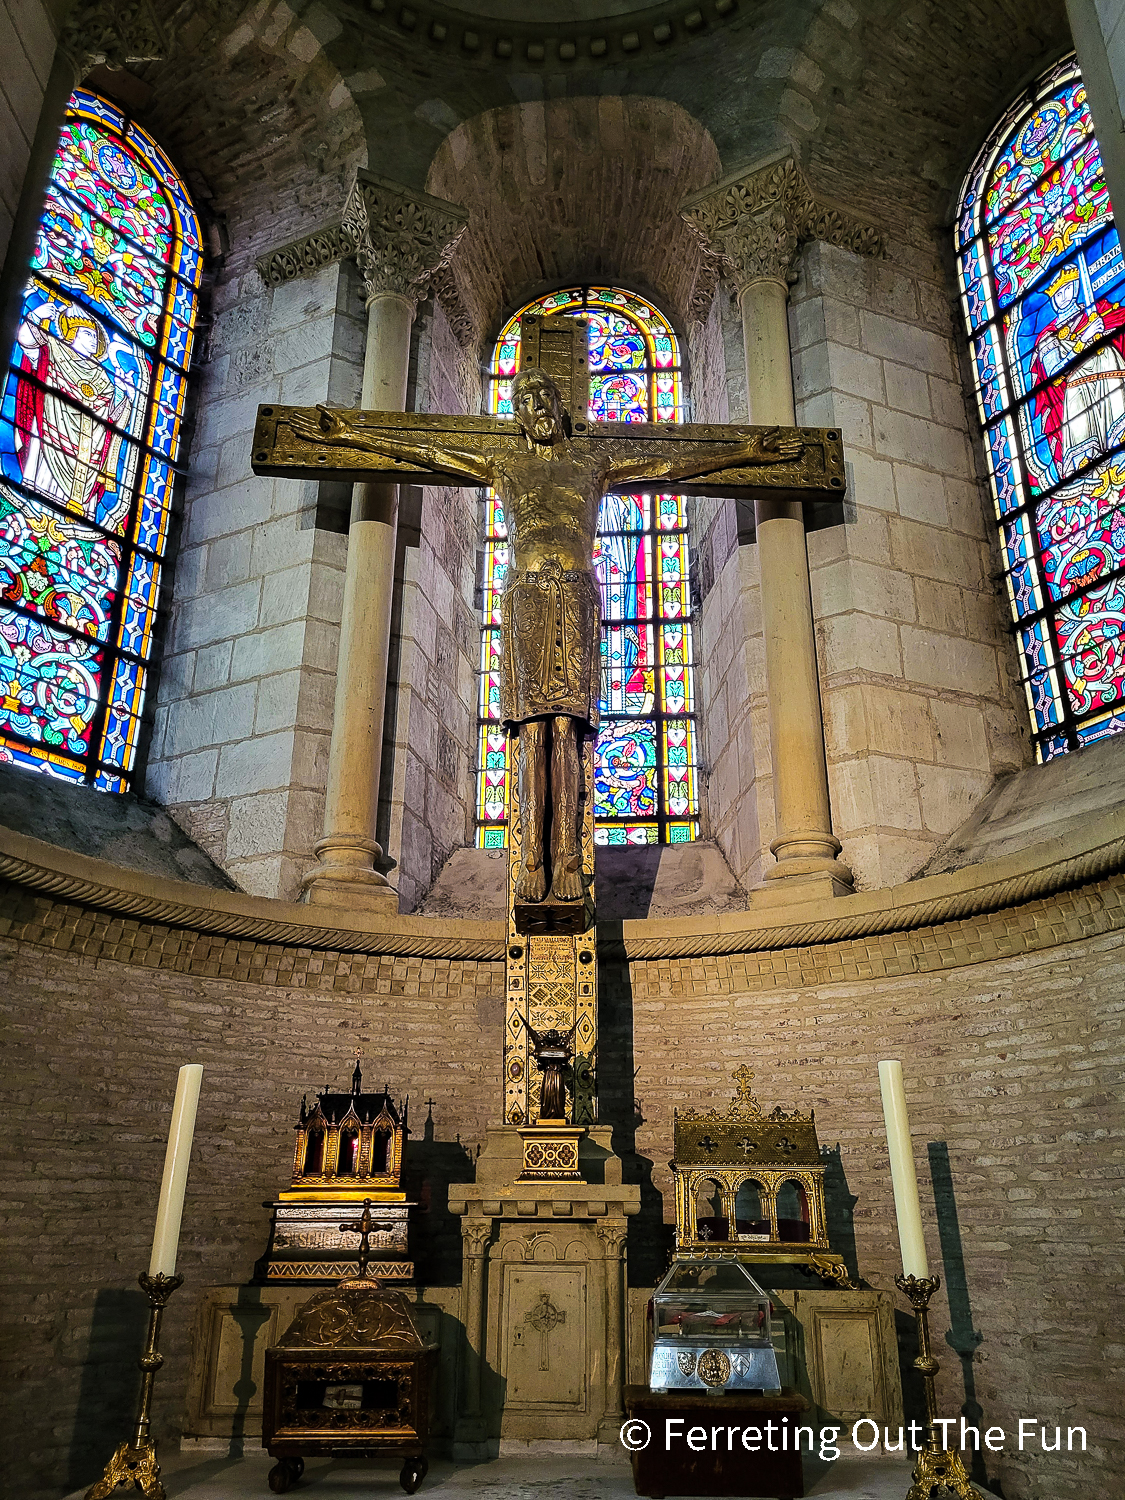 Holy relics in the Basilica of Saint-Sernin in Toulouse, France